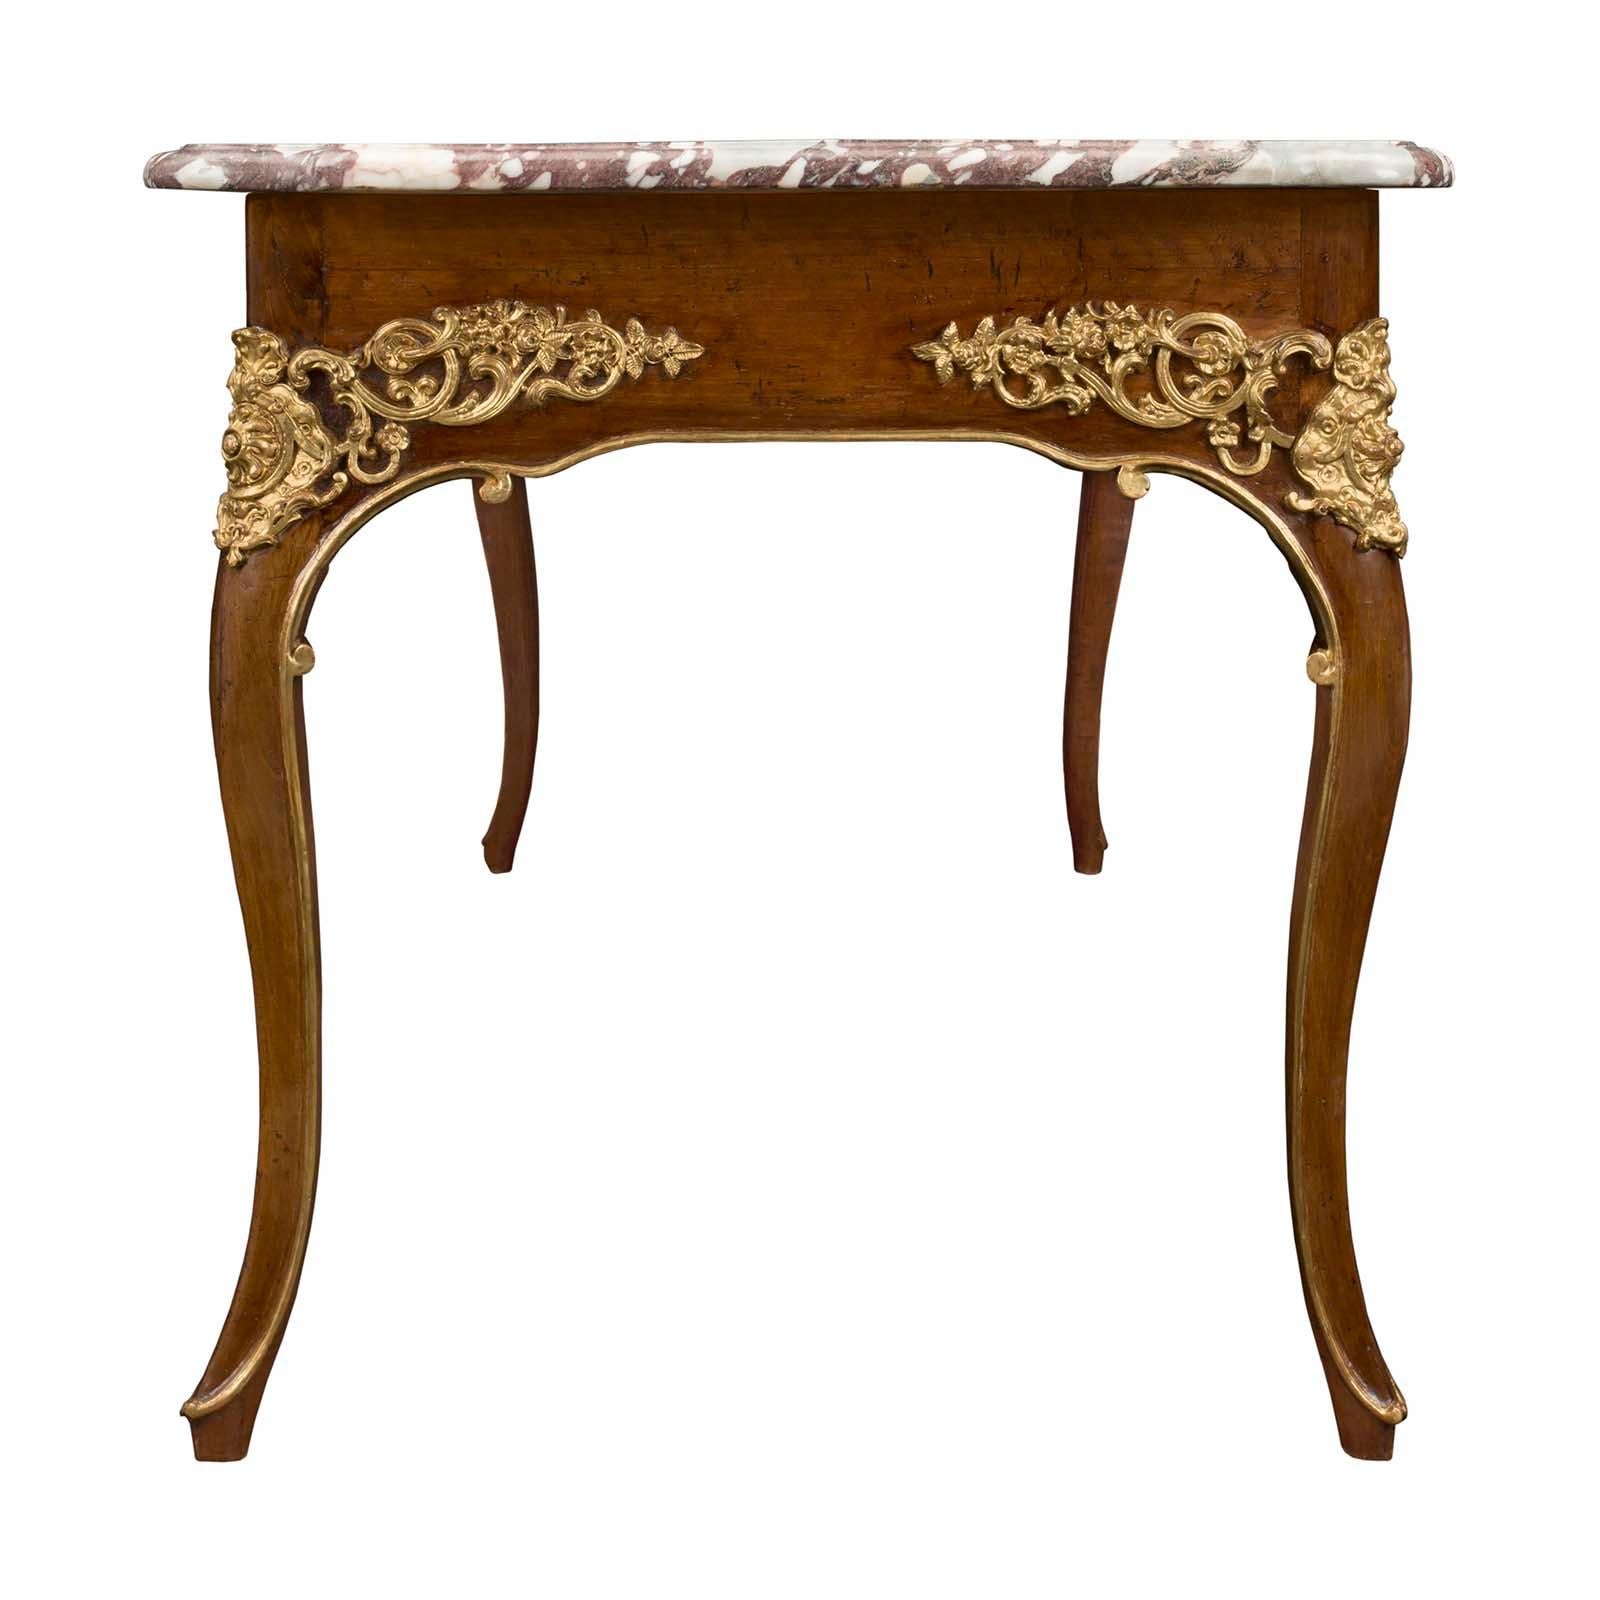 19th Century Continental 18th Century Louis XV Period Rectangular Walnut Centre Table For Sale